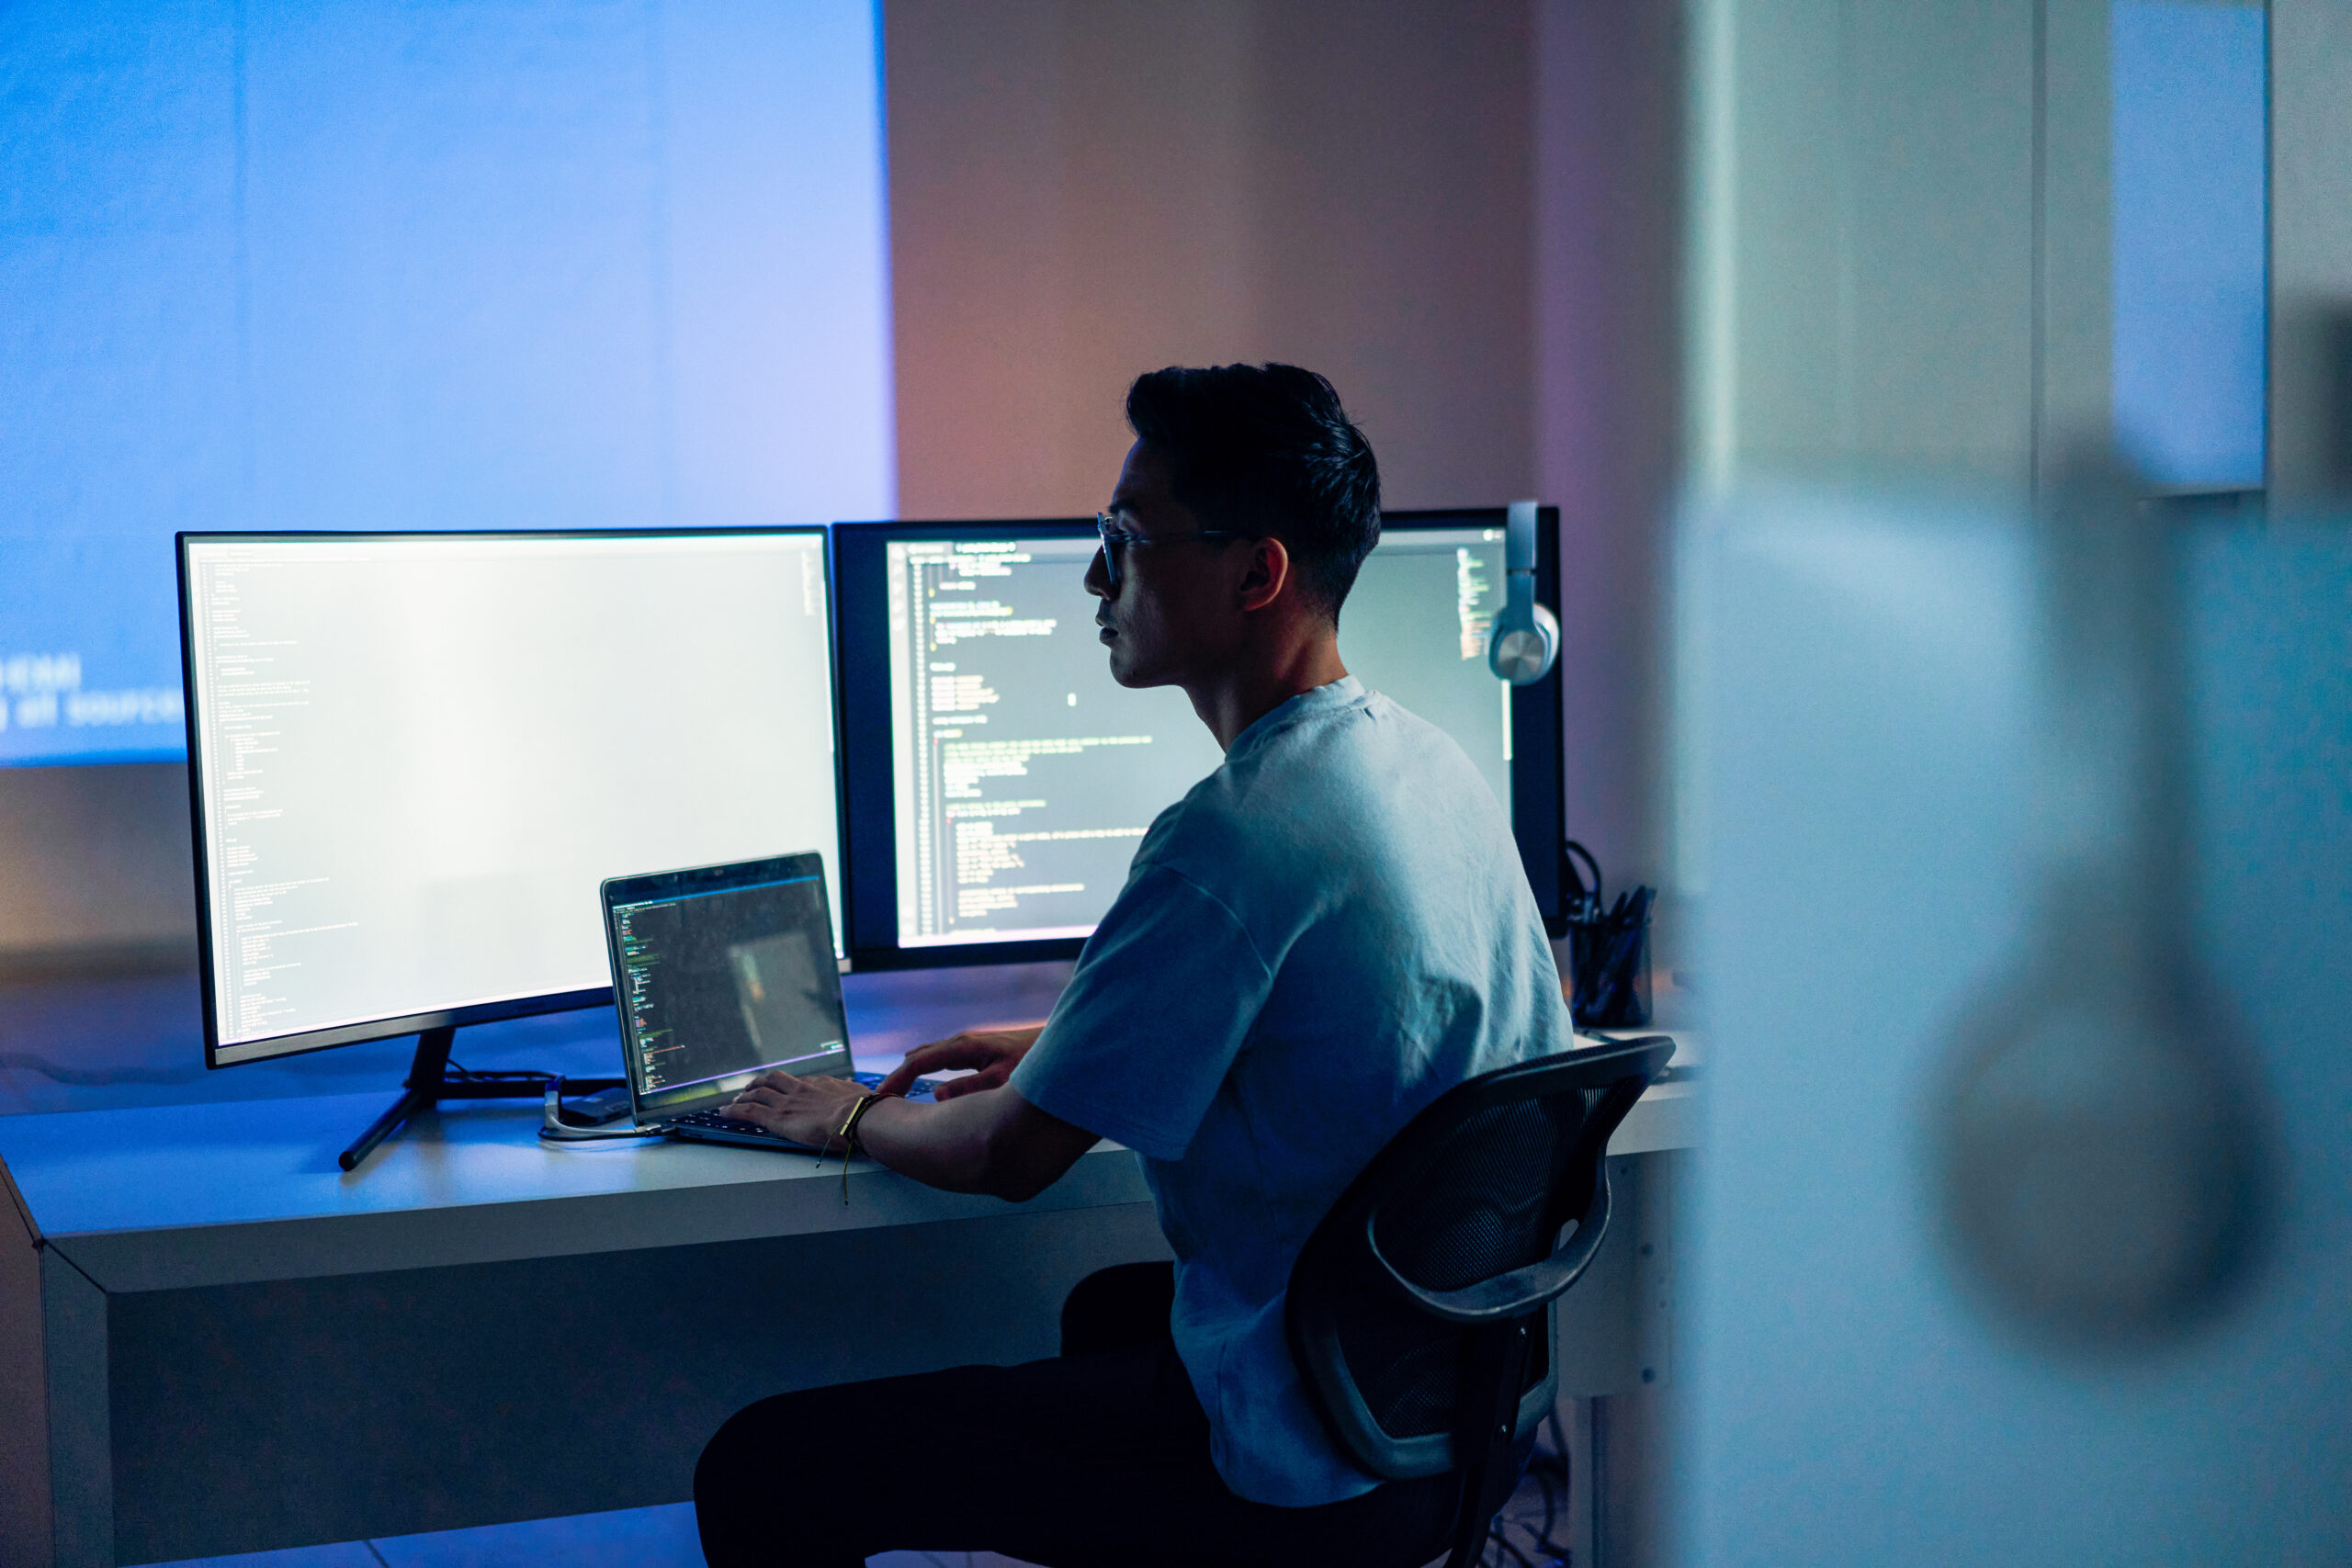 Web design, coding and Asian man with a computer for programming a website at night. Cyber security, developer and programmer reading information for a software database on a pc in a dark office